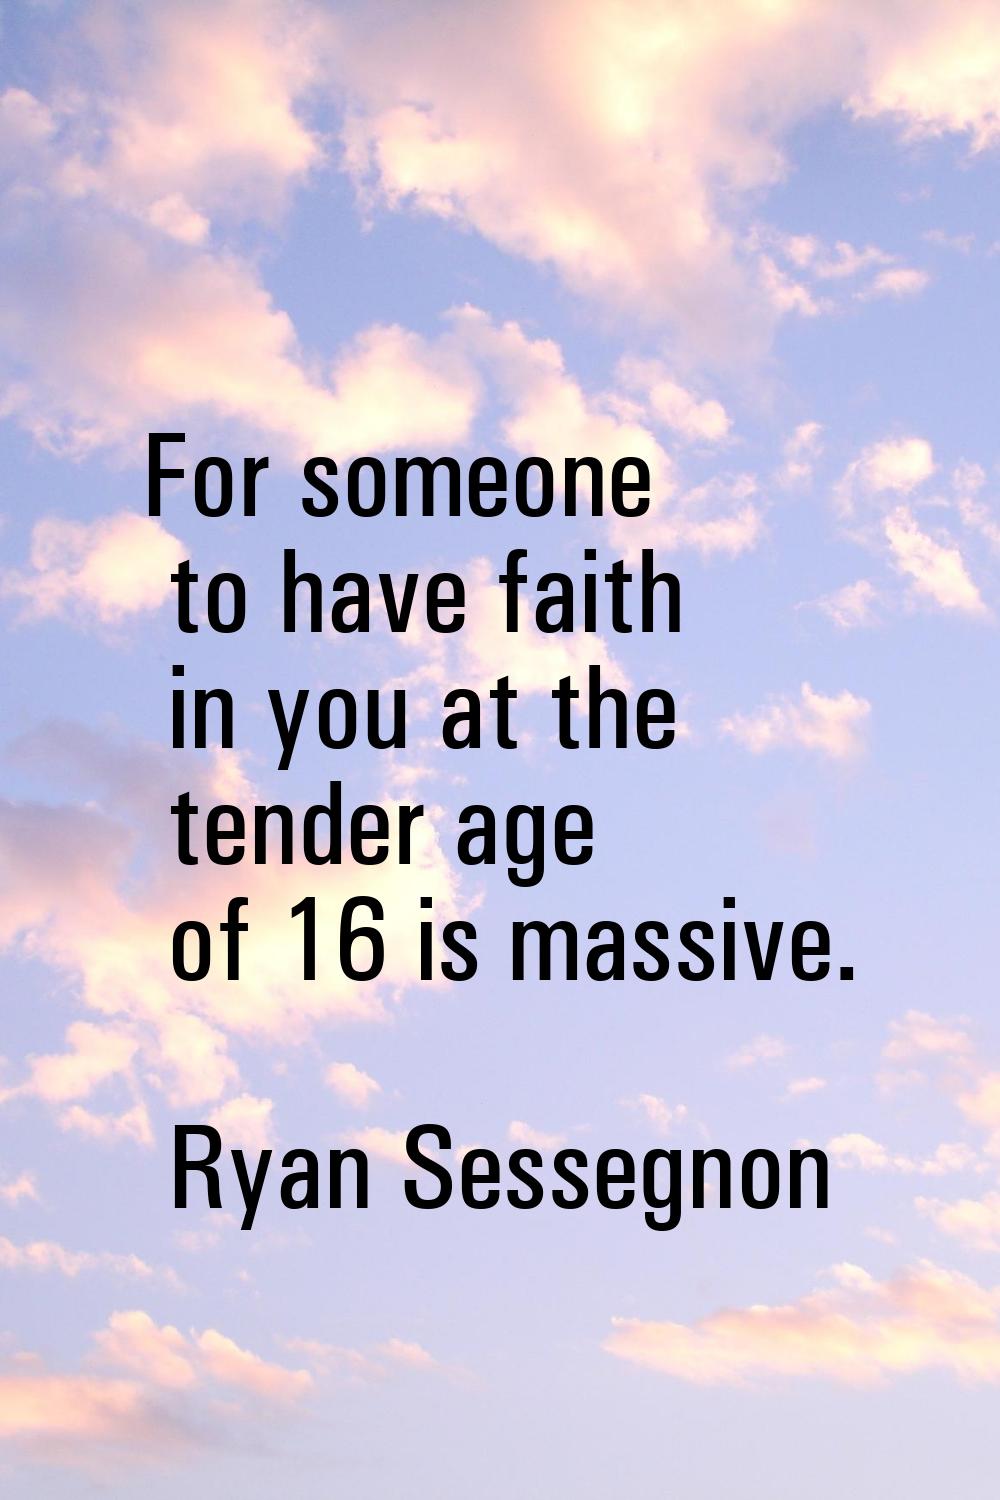 For someone to have faith in you at the tender age of 16 is massive.